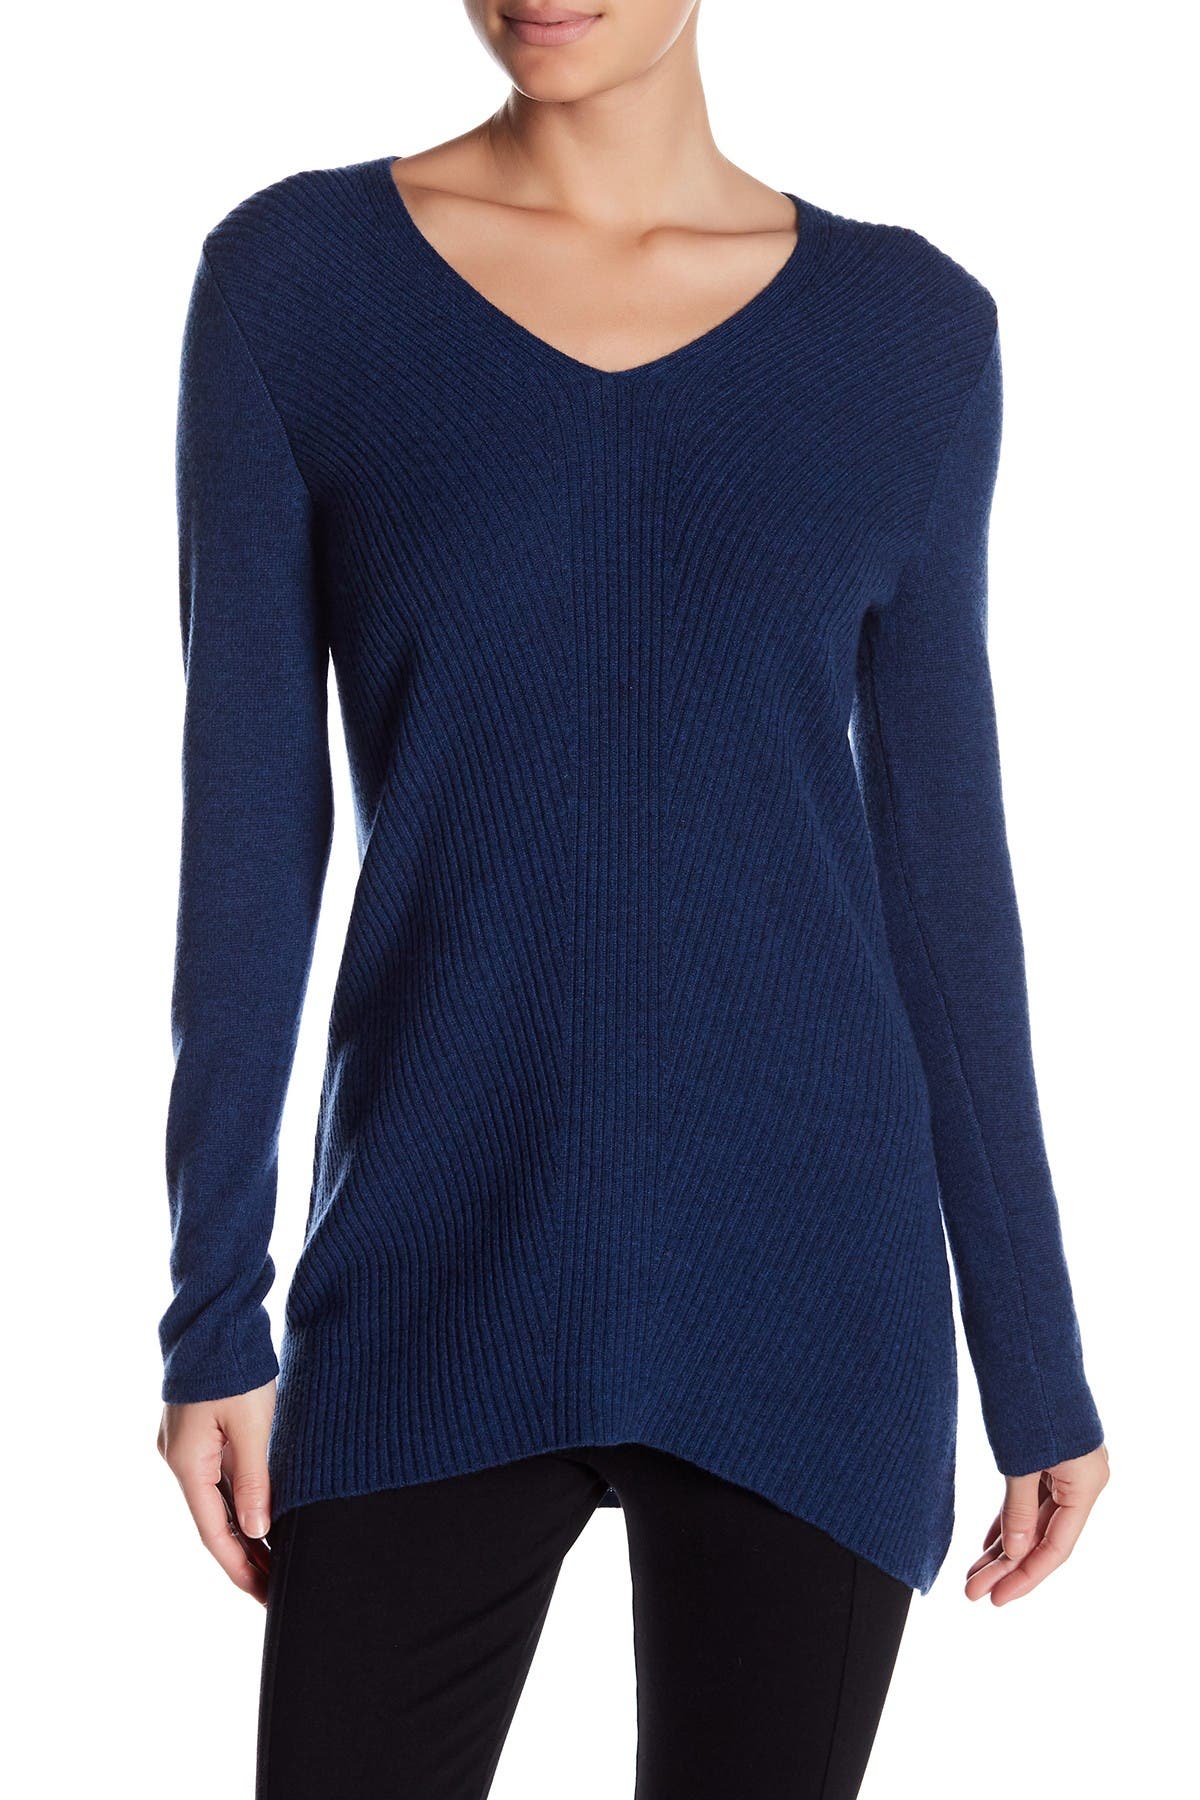 GRIFFEN CASHMERE | Cashmere Long Sleeve Ribbed V-Neck Sweater ...